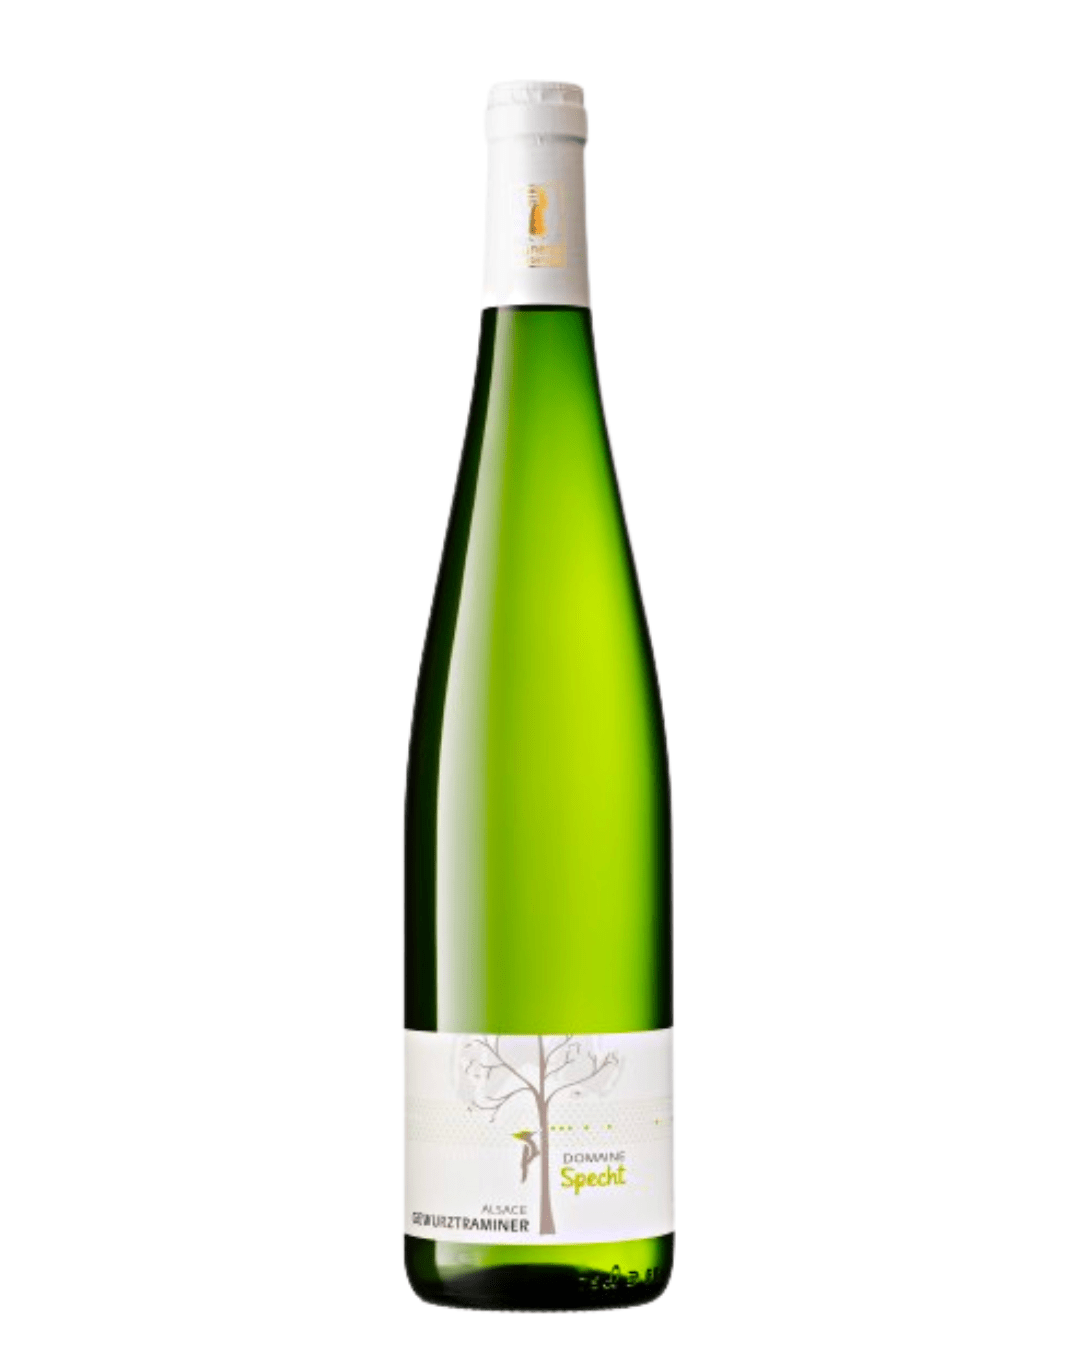 Shop Domaine Specht Domaine Specht Gewurztraminer 2019 online at PENTICTON artisanal French wine store in Hong Kong. Discover other French wines, promotions, workshops and featured offers at pentictonpacific.com 